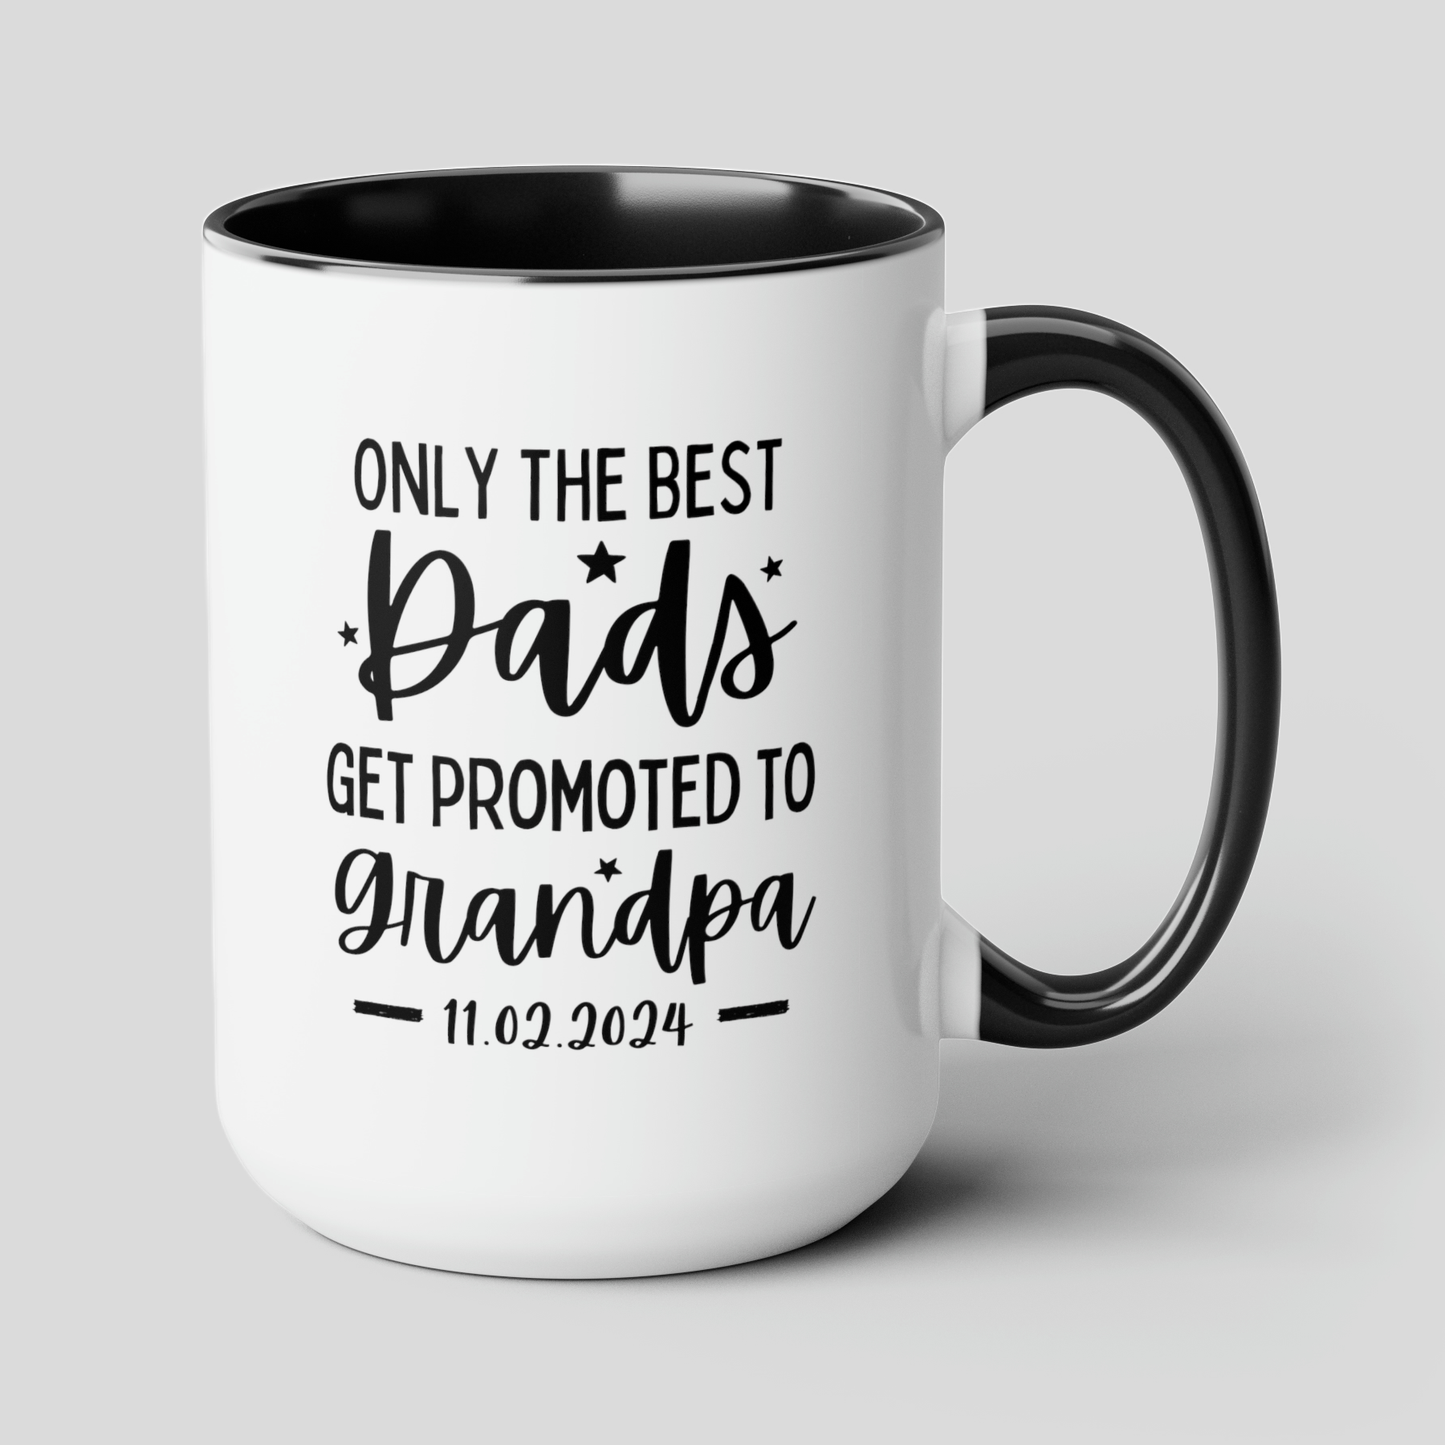 Only The Best Dads Get Promoted To Grandpa 15oz white with black accent funny large coffee mug gift for granddad grandfather grandpa birthday christmas men fathers day waveywares wavey wares wavywares wavy wares cover